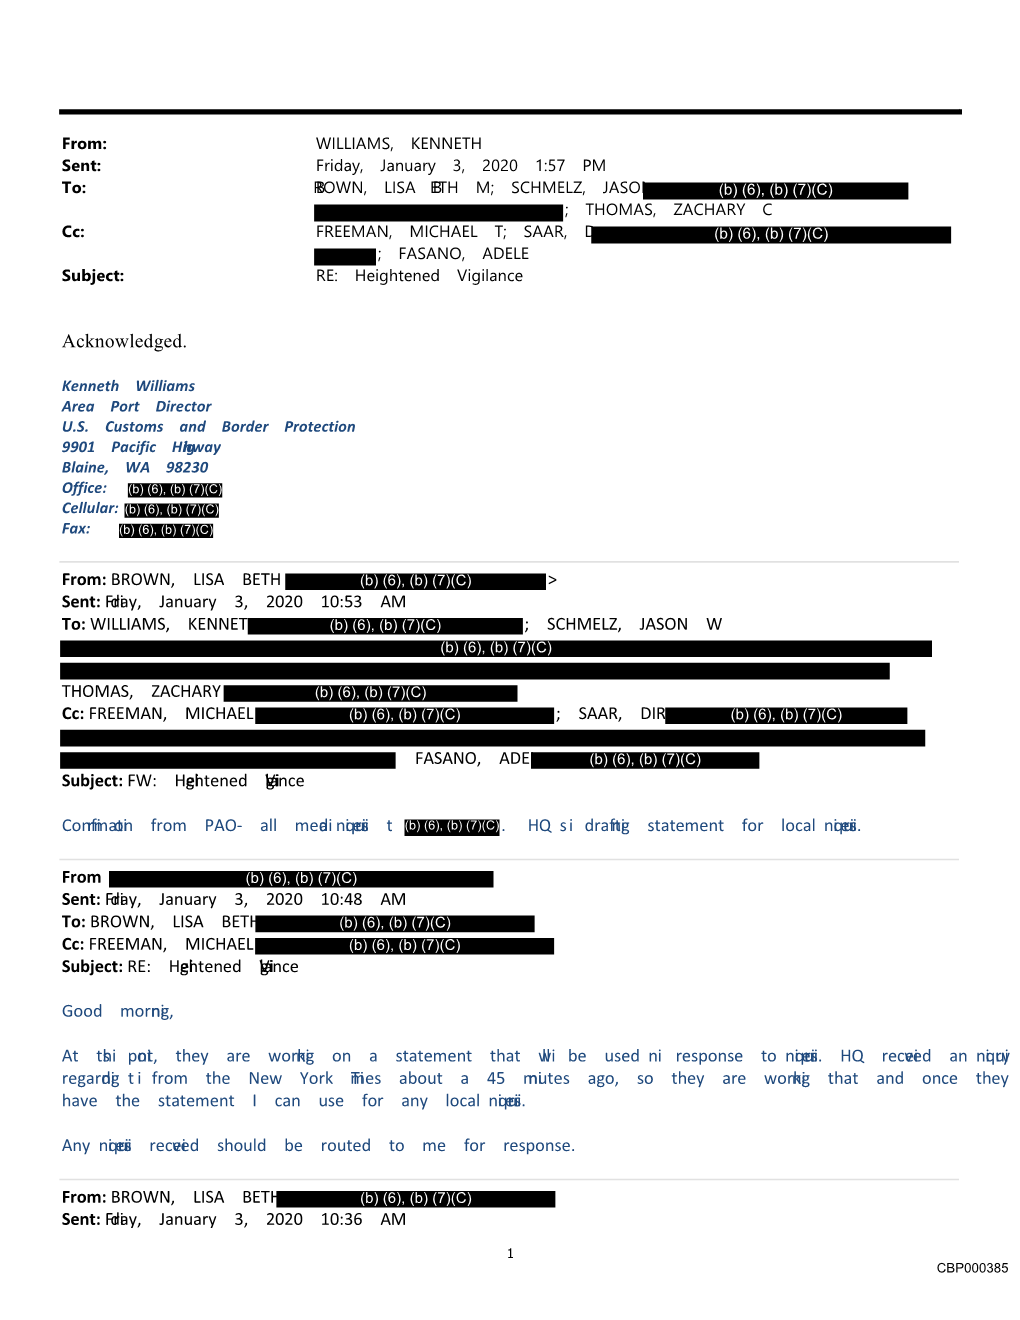 Link to the Fasano Email FOIA Production